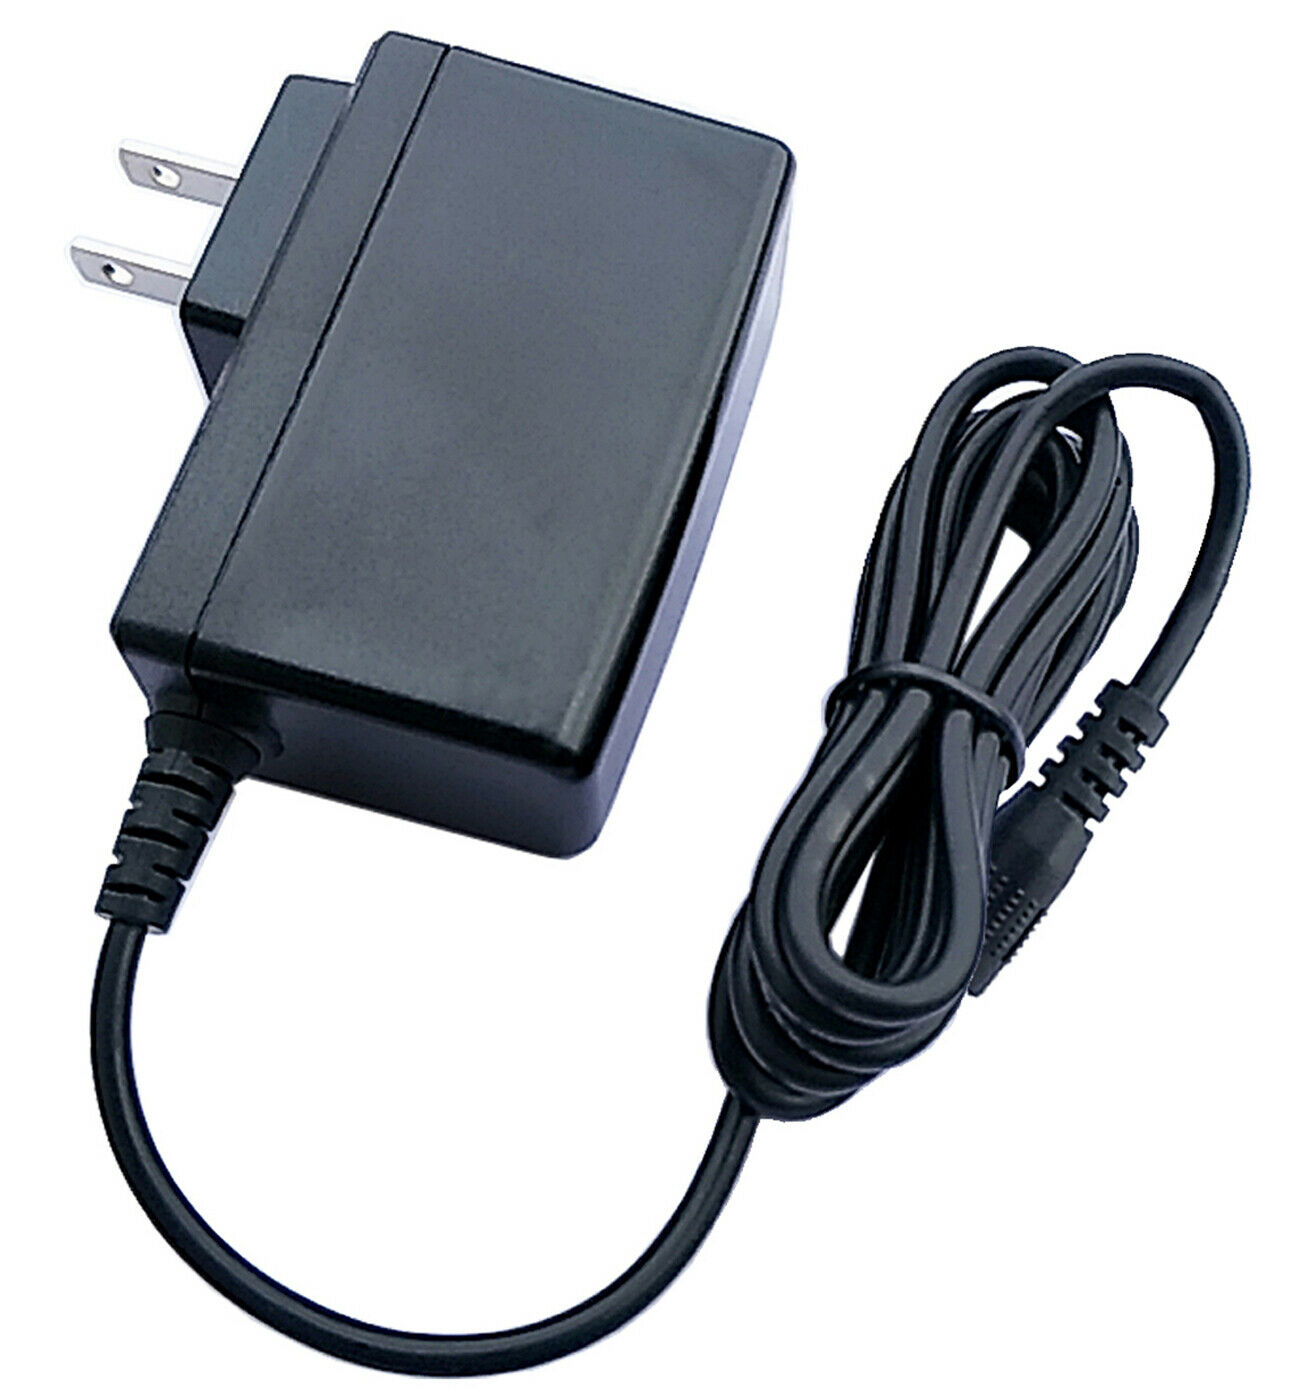 AC/DC Adapter For Motorola Symbol DS3578 DS 3578 Series Barcode Scanner Charger Technical Specifications: 1 AC input vo